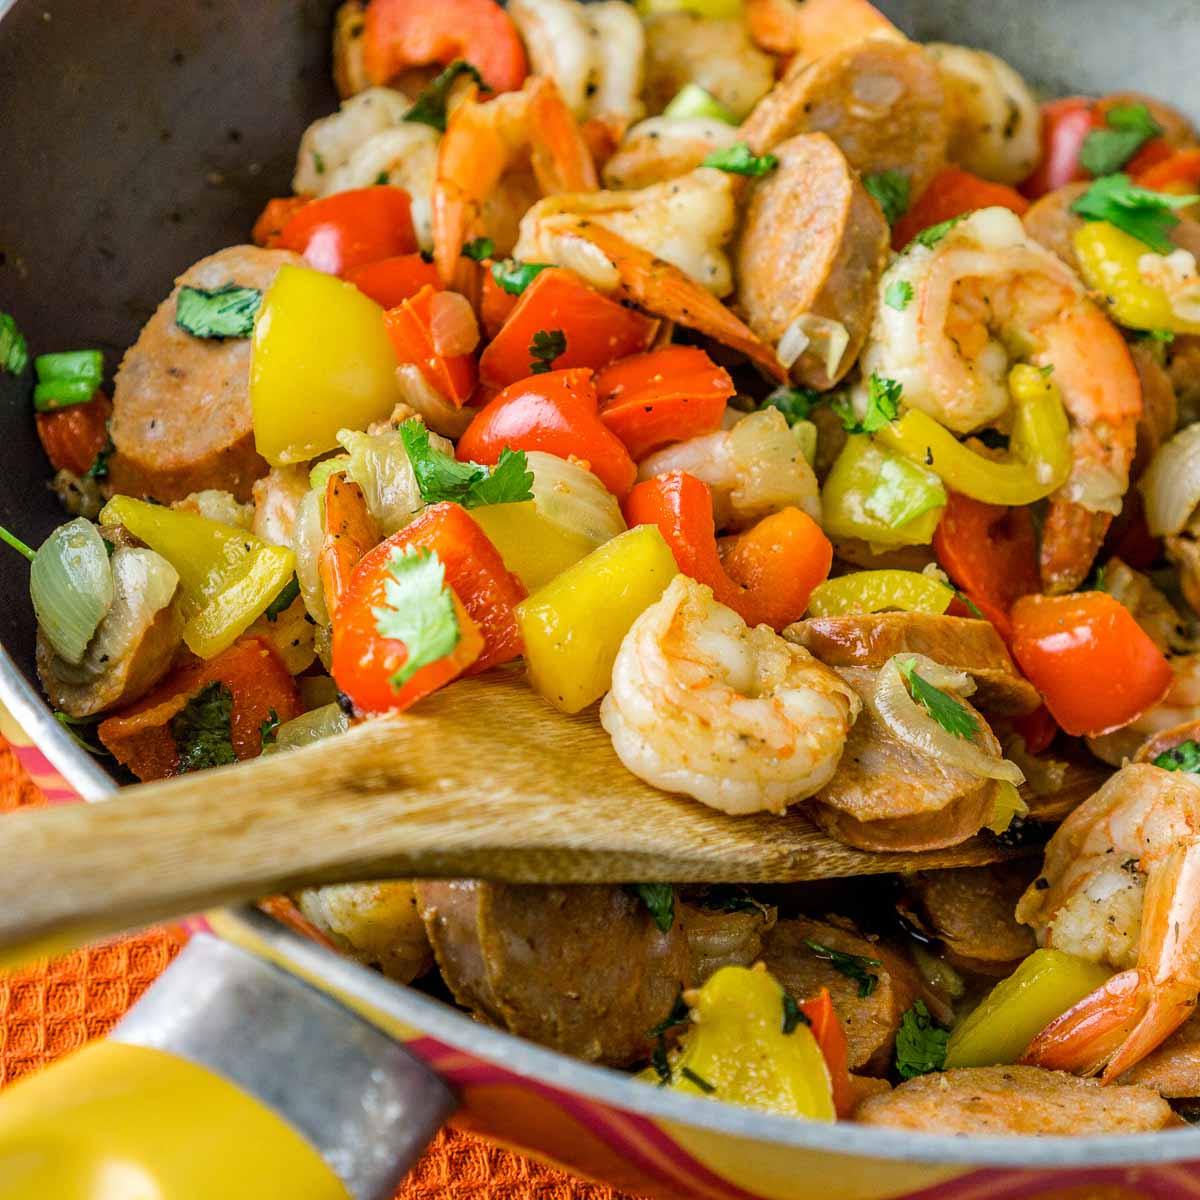 Skillet with sausage, shrimp, and bell peppers